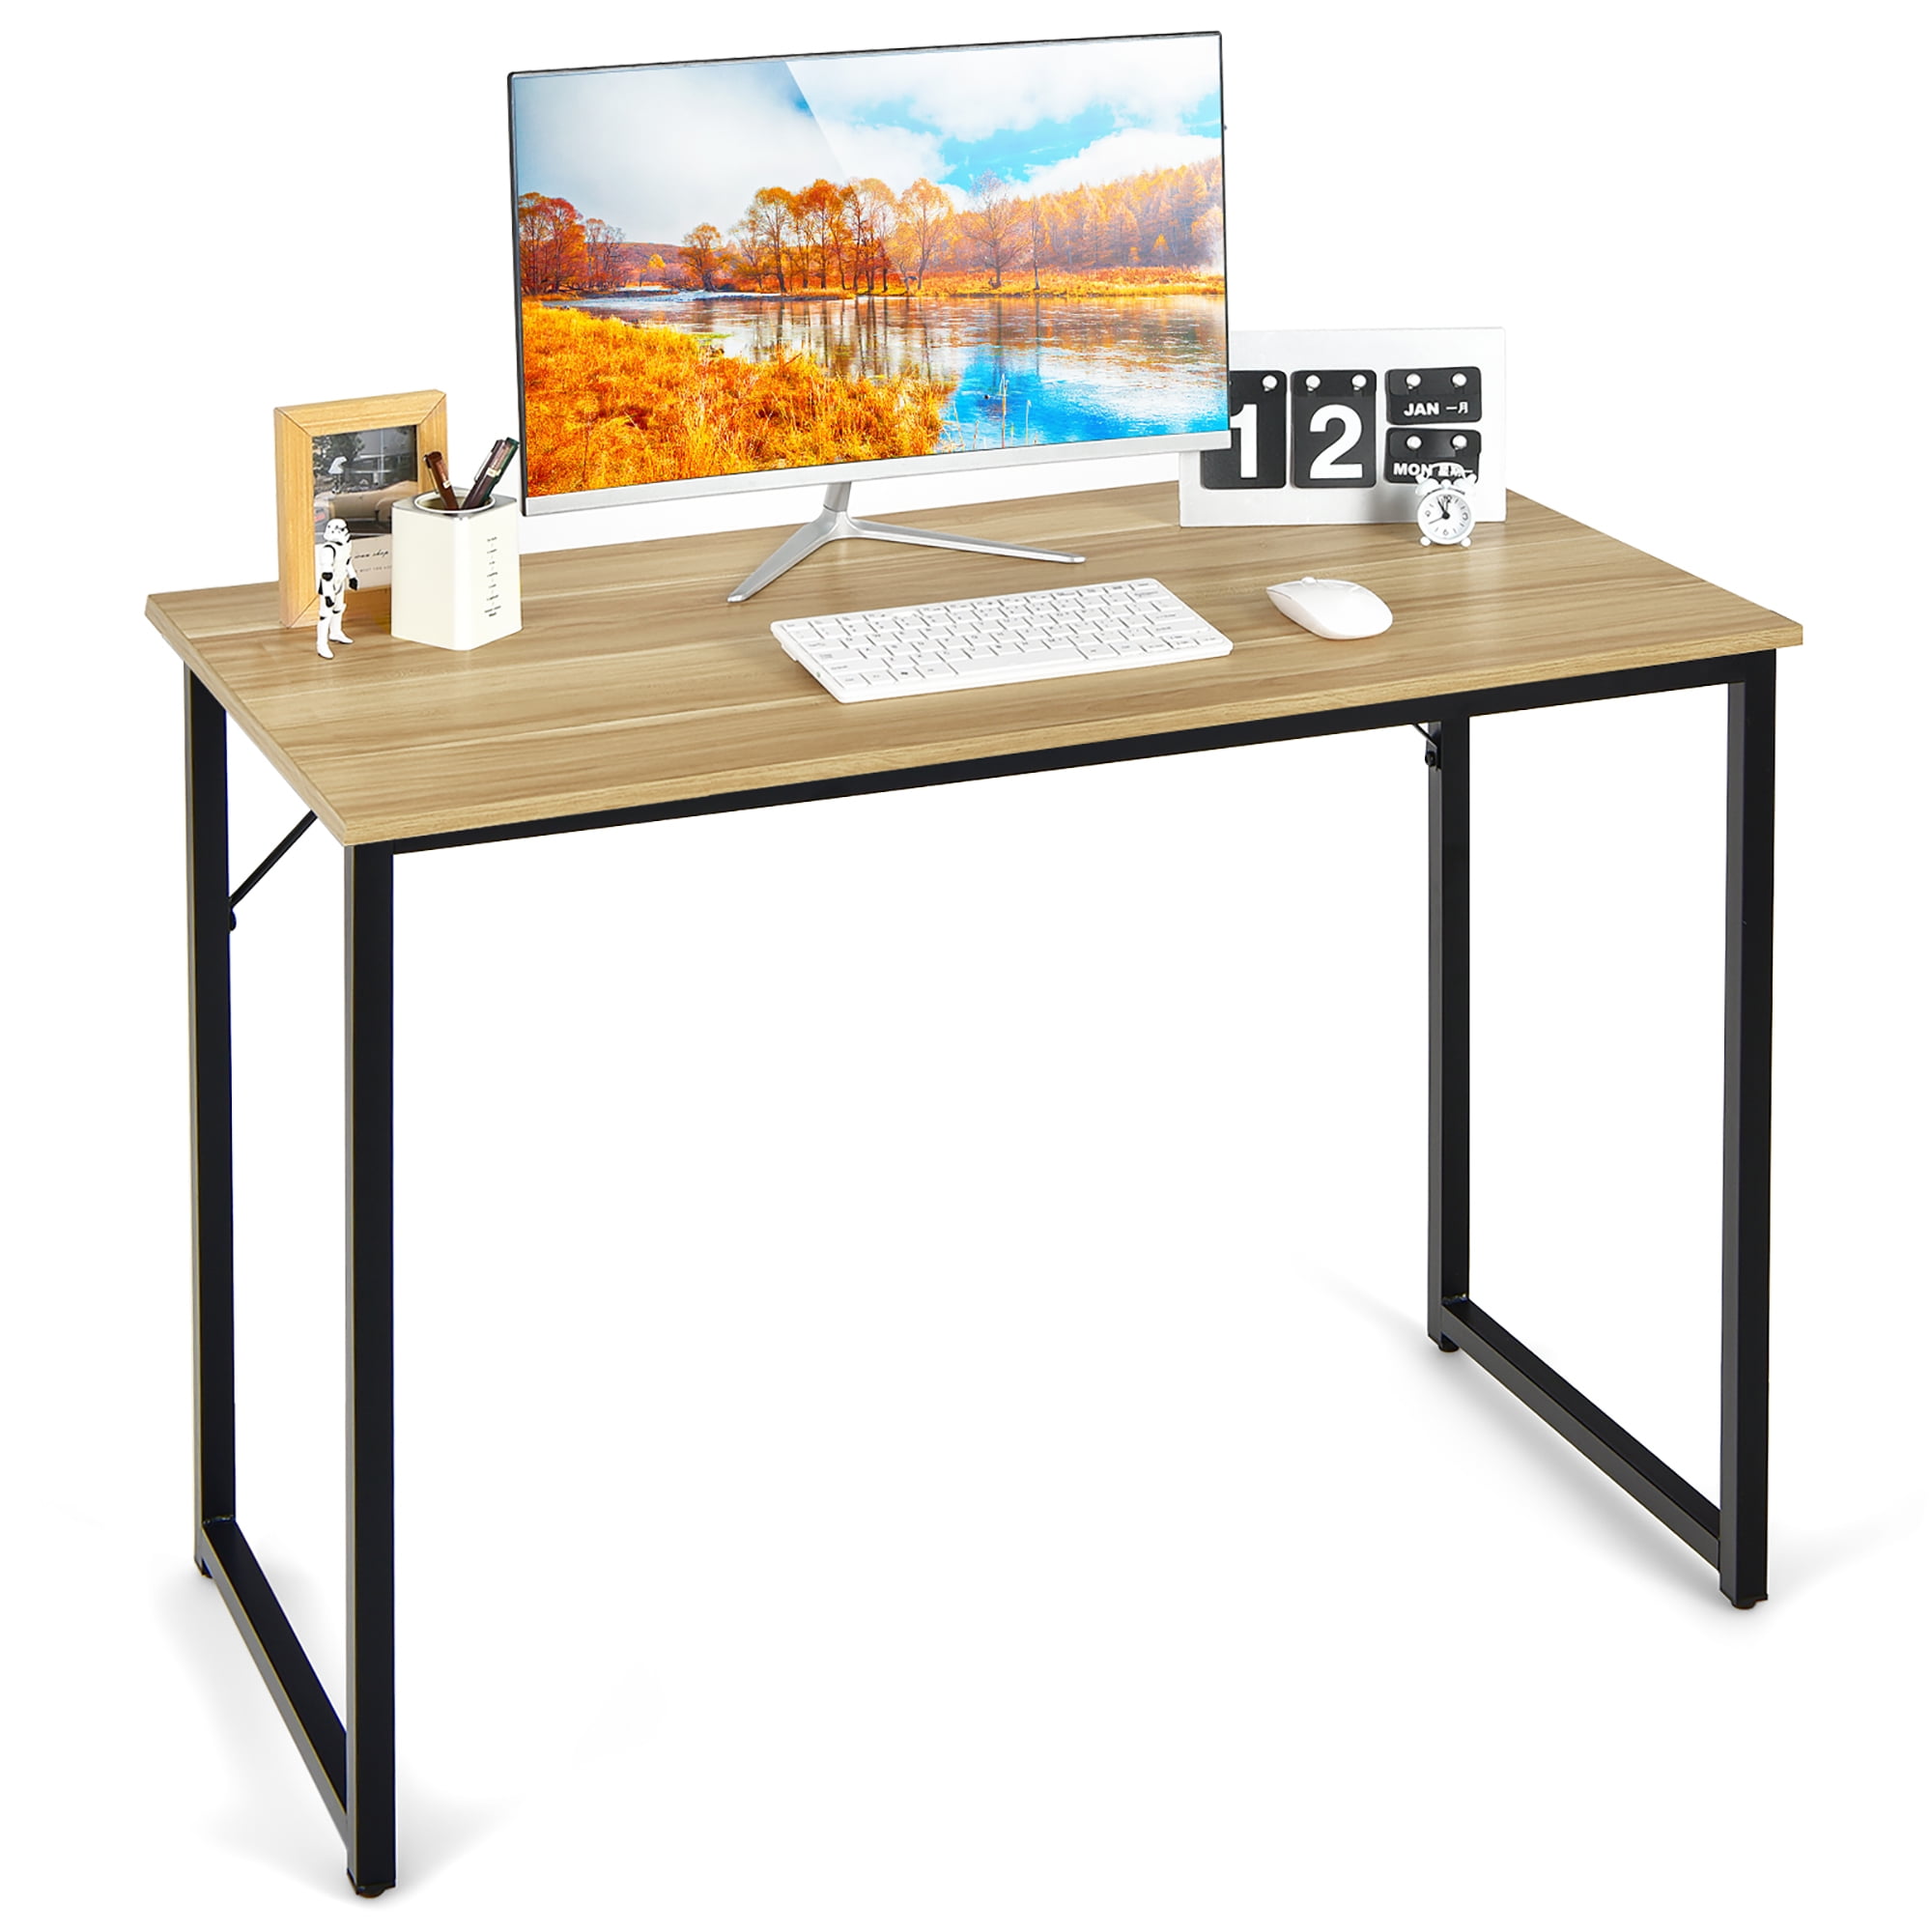 PayLessHere 47 inch Computer Desk Modern Writing Desk, Simple Study Table,  Industrial Office Desk, Sturdy Laptop Table for Home Office, Nature